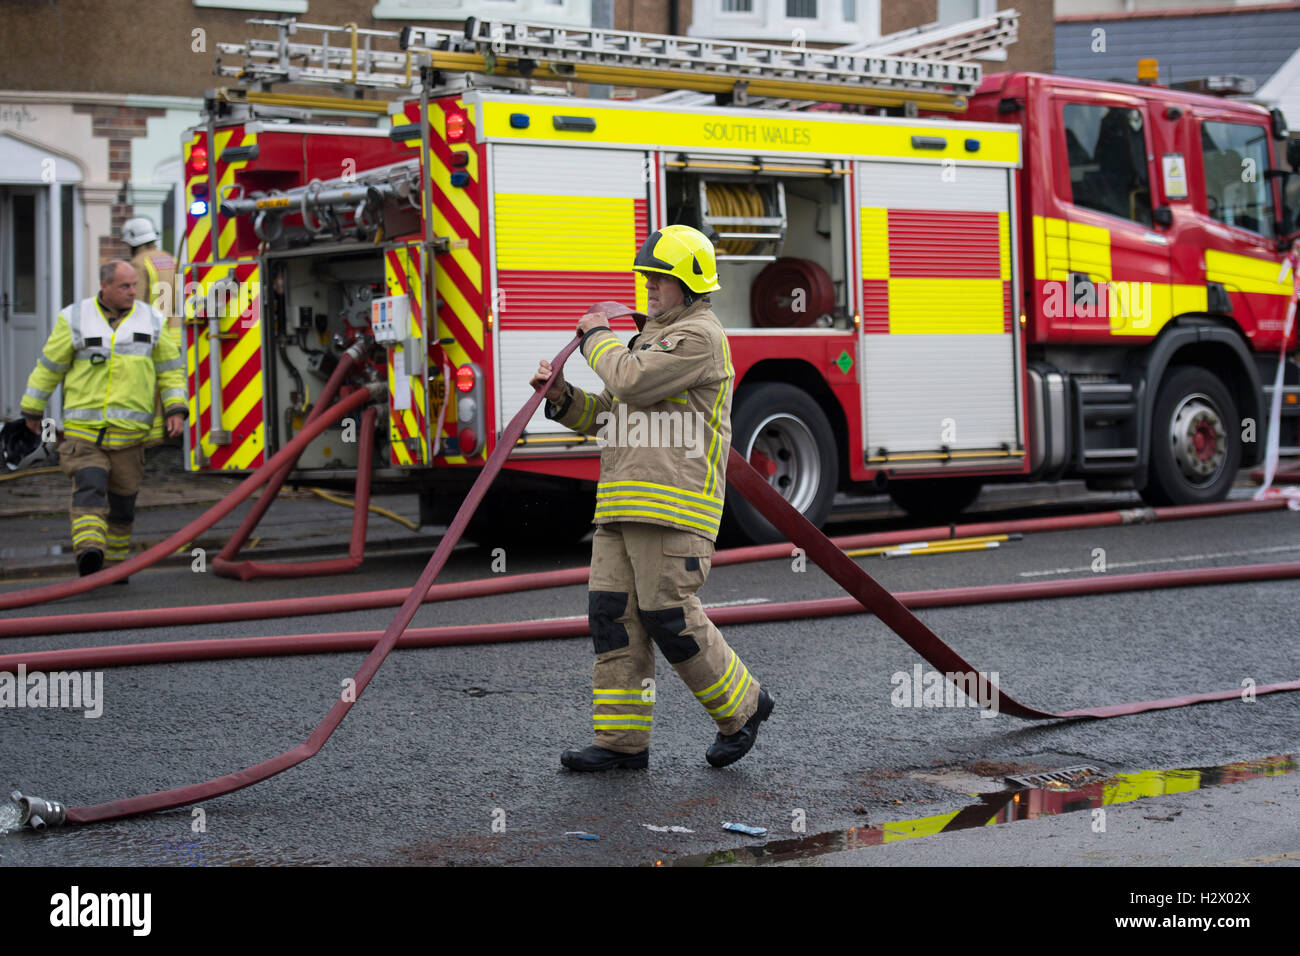 A firefighter carries a water hose at the scene of a fire in Birchgrove, Cardiff. Stock Photo